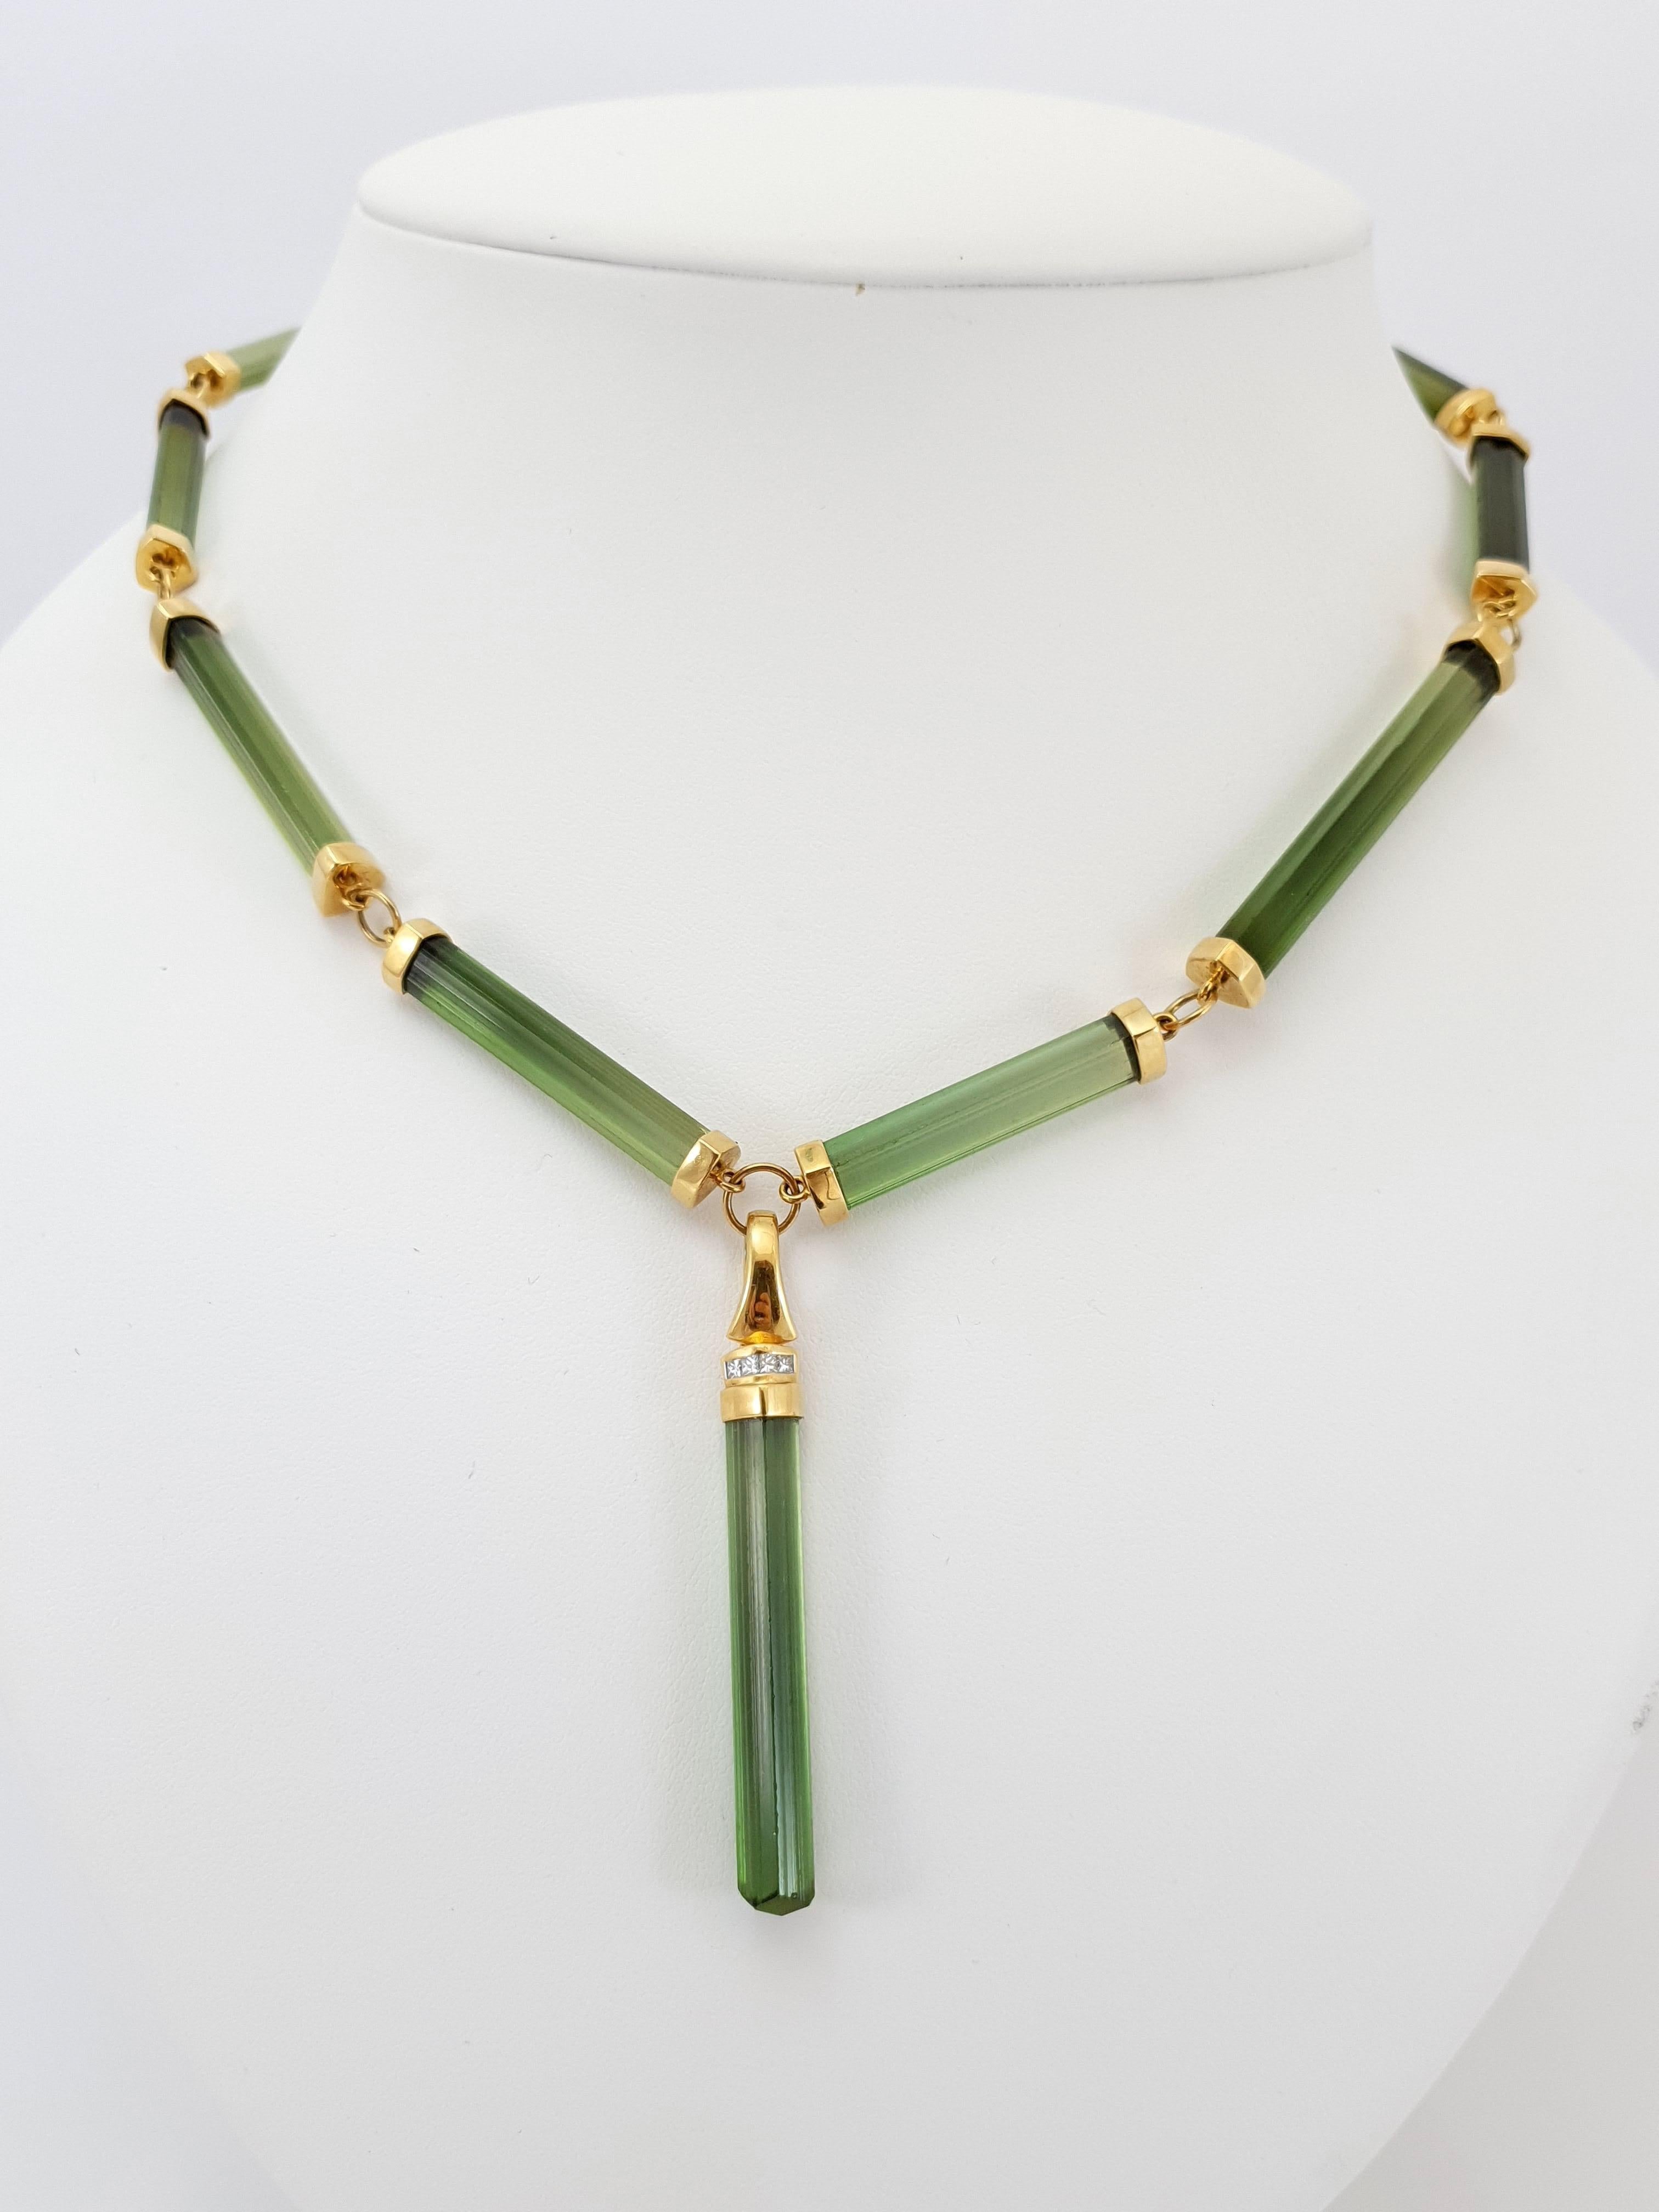 This Natural Green Tourmaline Crystal Beaded Necklace with 18 Carat yellow Gold/diamonds is totally handmade.
Cutting as well as goldwork are made in German quality. The lobster clasp is easy to handle.
The crystals surface is completly natural and